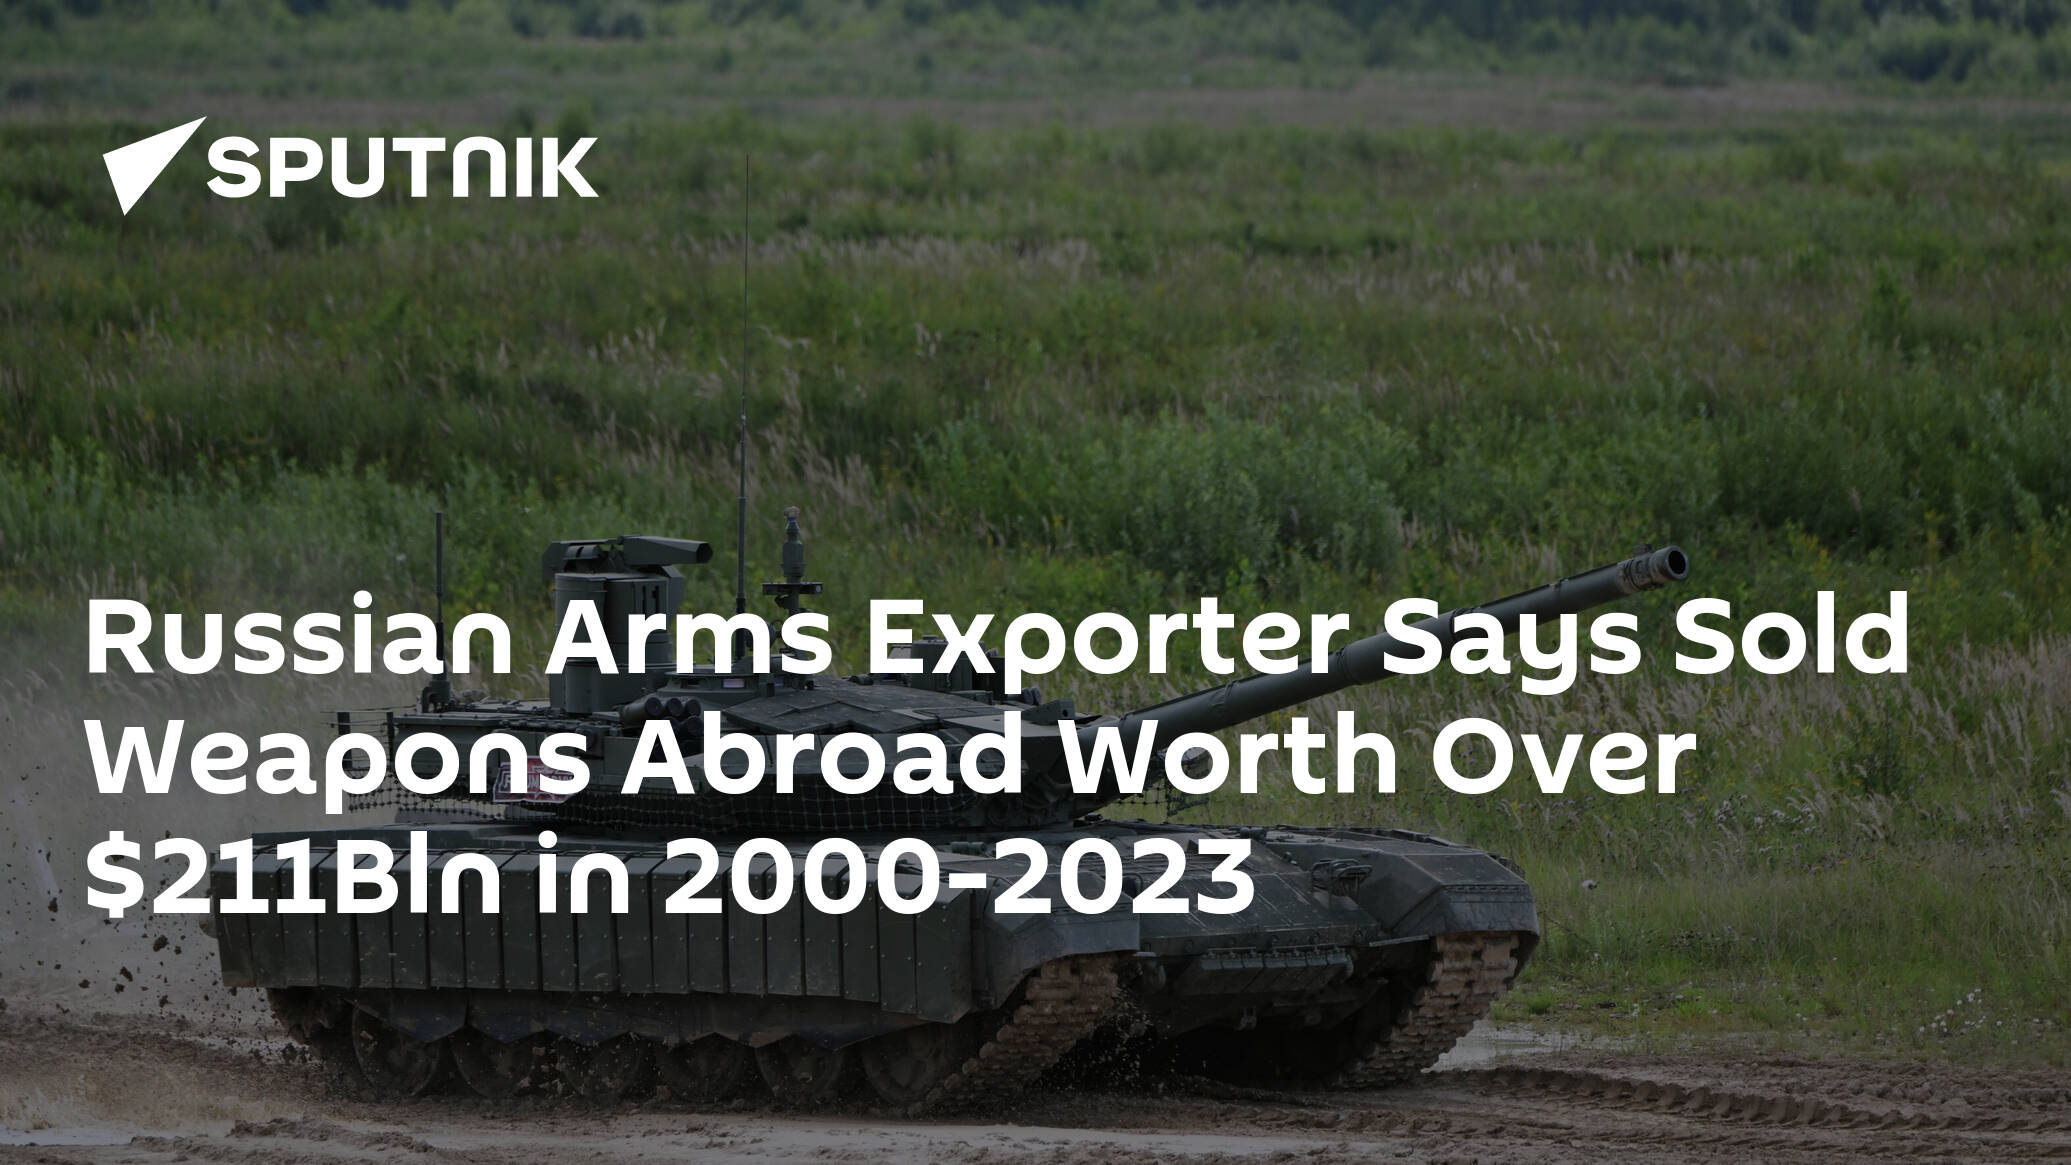 Russian Arms Exporter Says Sold Weapons Abroad Worth Over 1Bln in 2000-2023